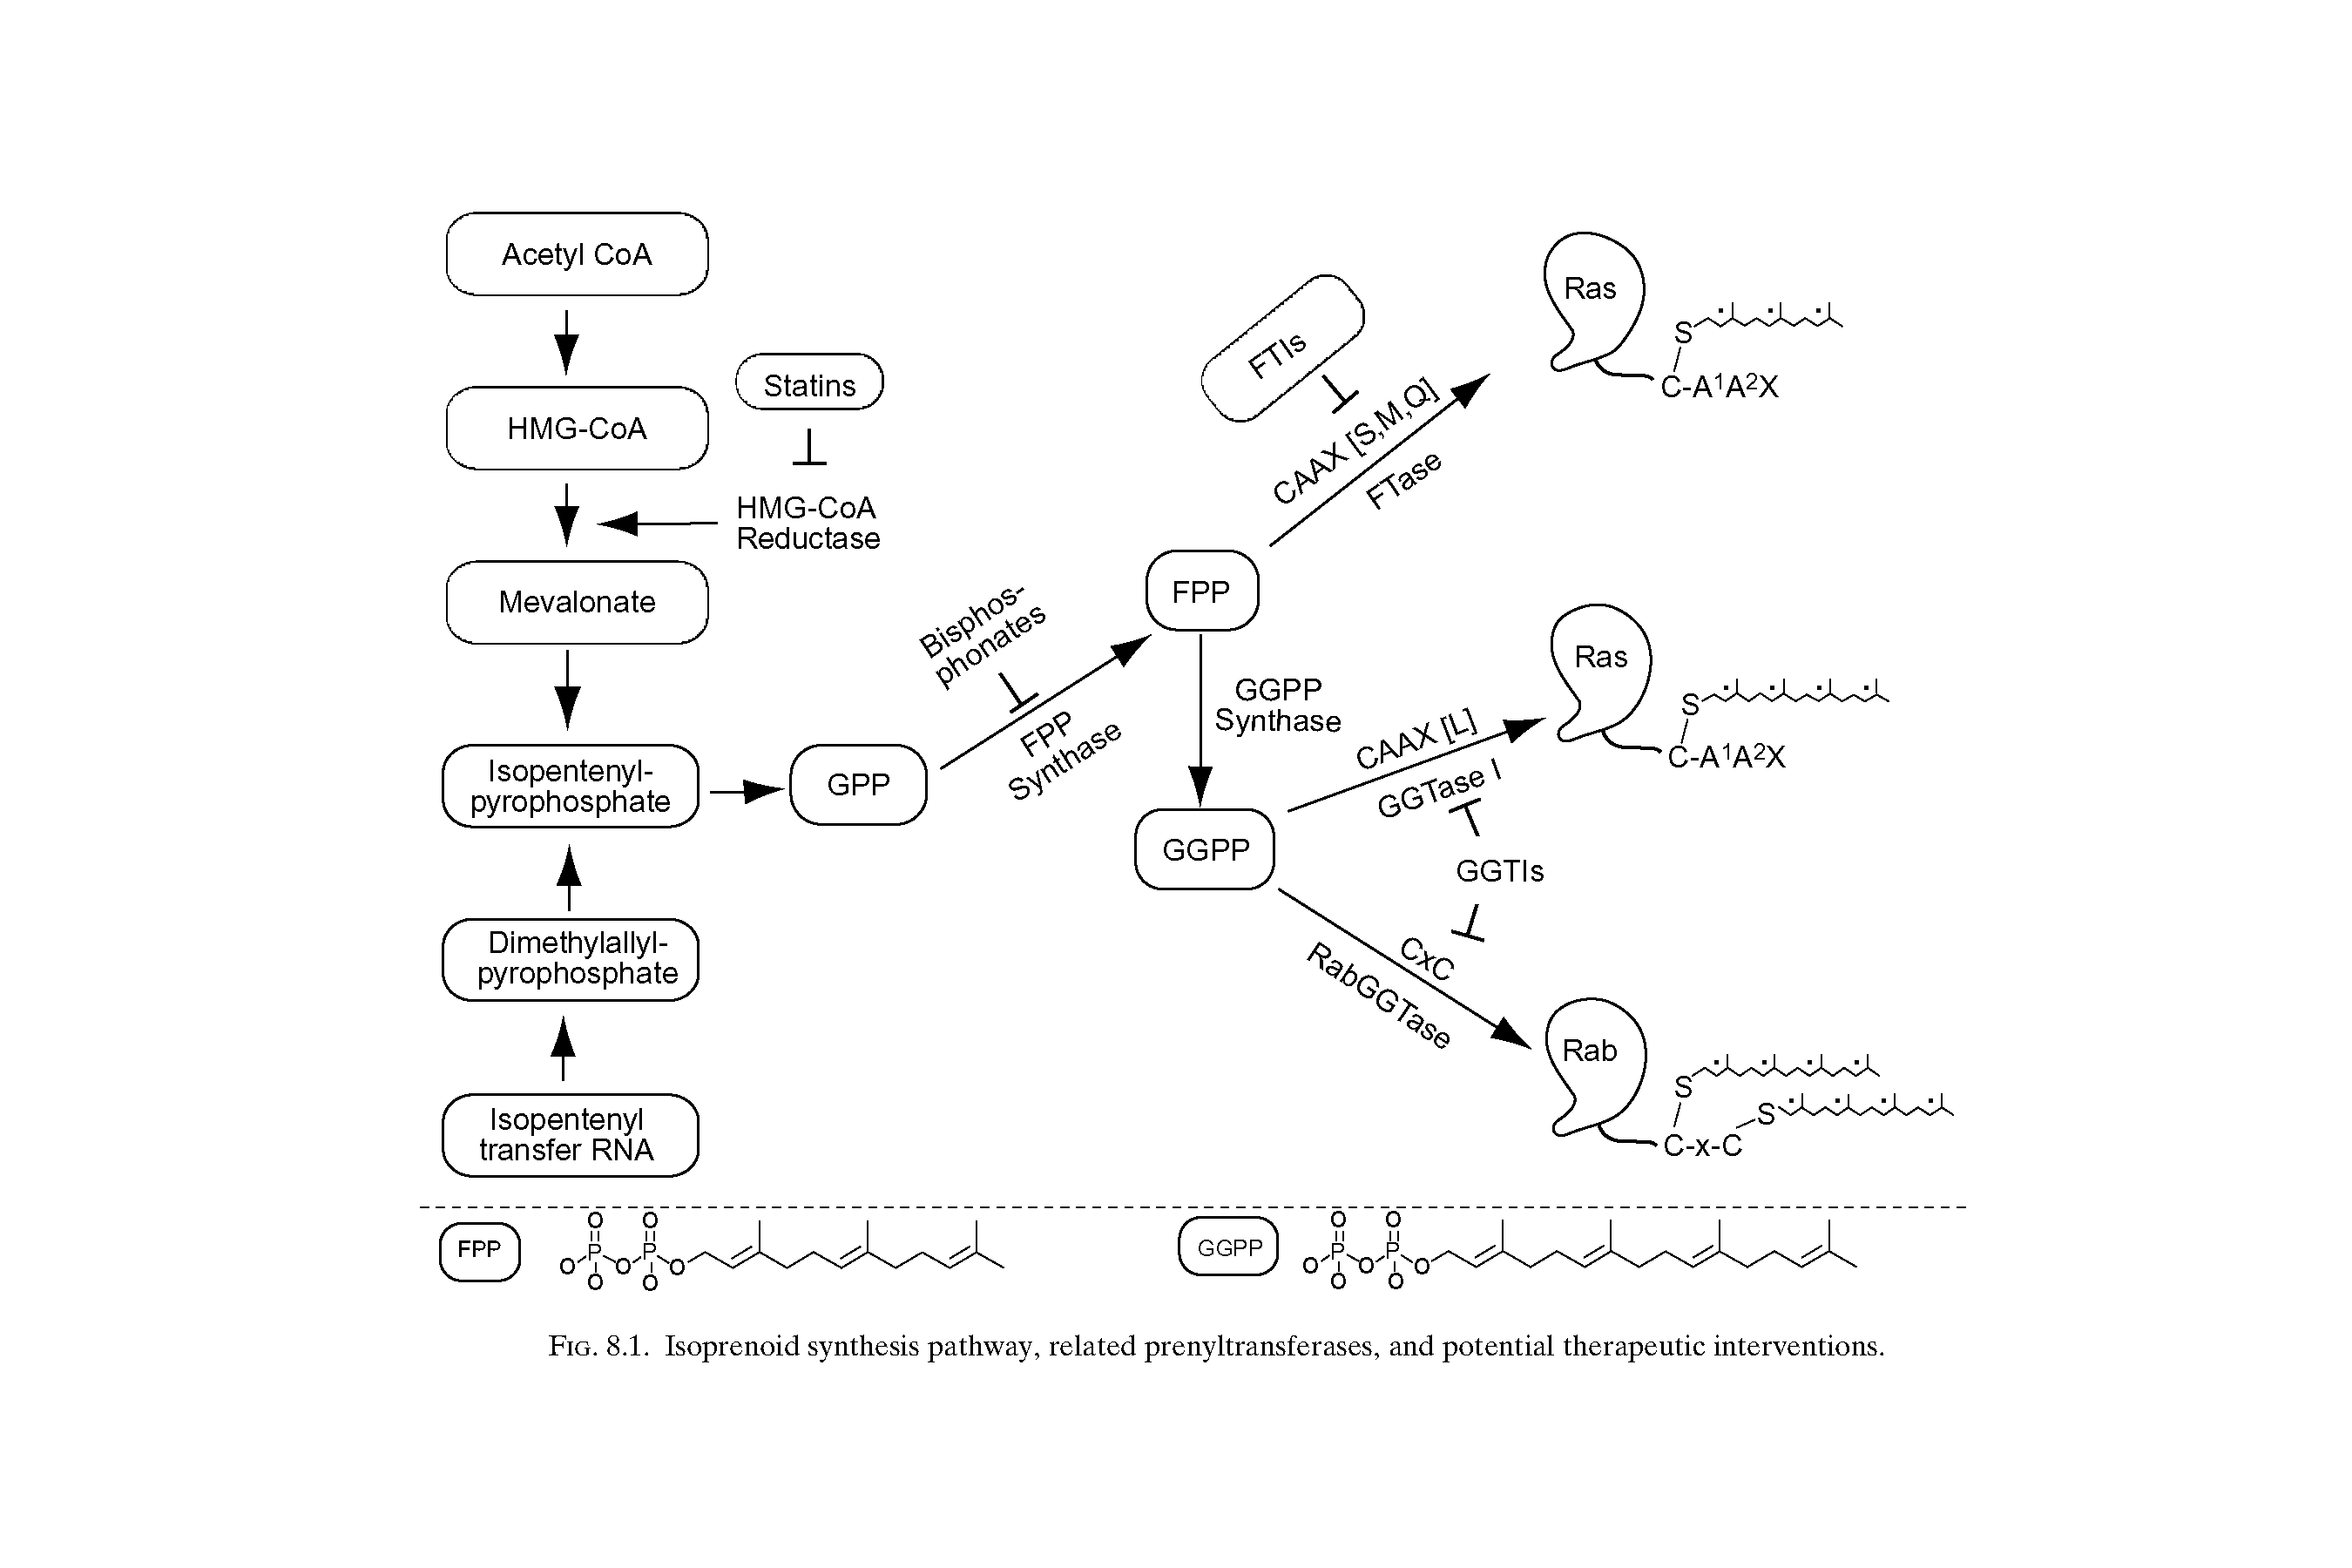 Fig. 8.1. Isoprenoid synthesis pathway, related prenyltransferases, and potential therapeutic interventions.